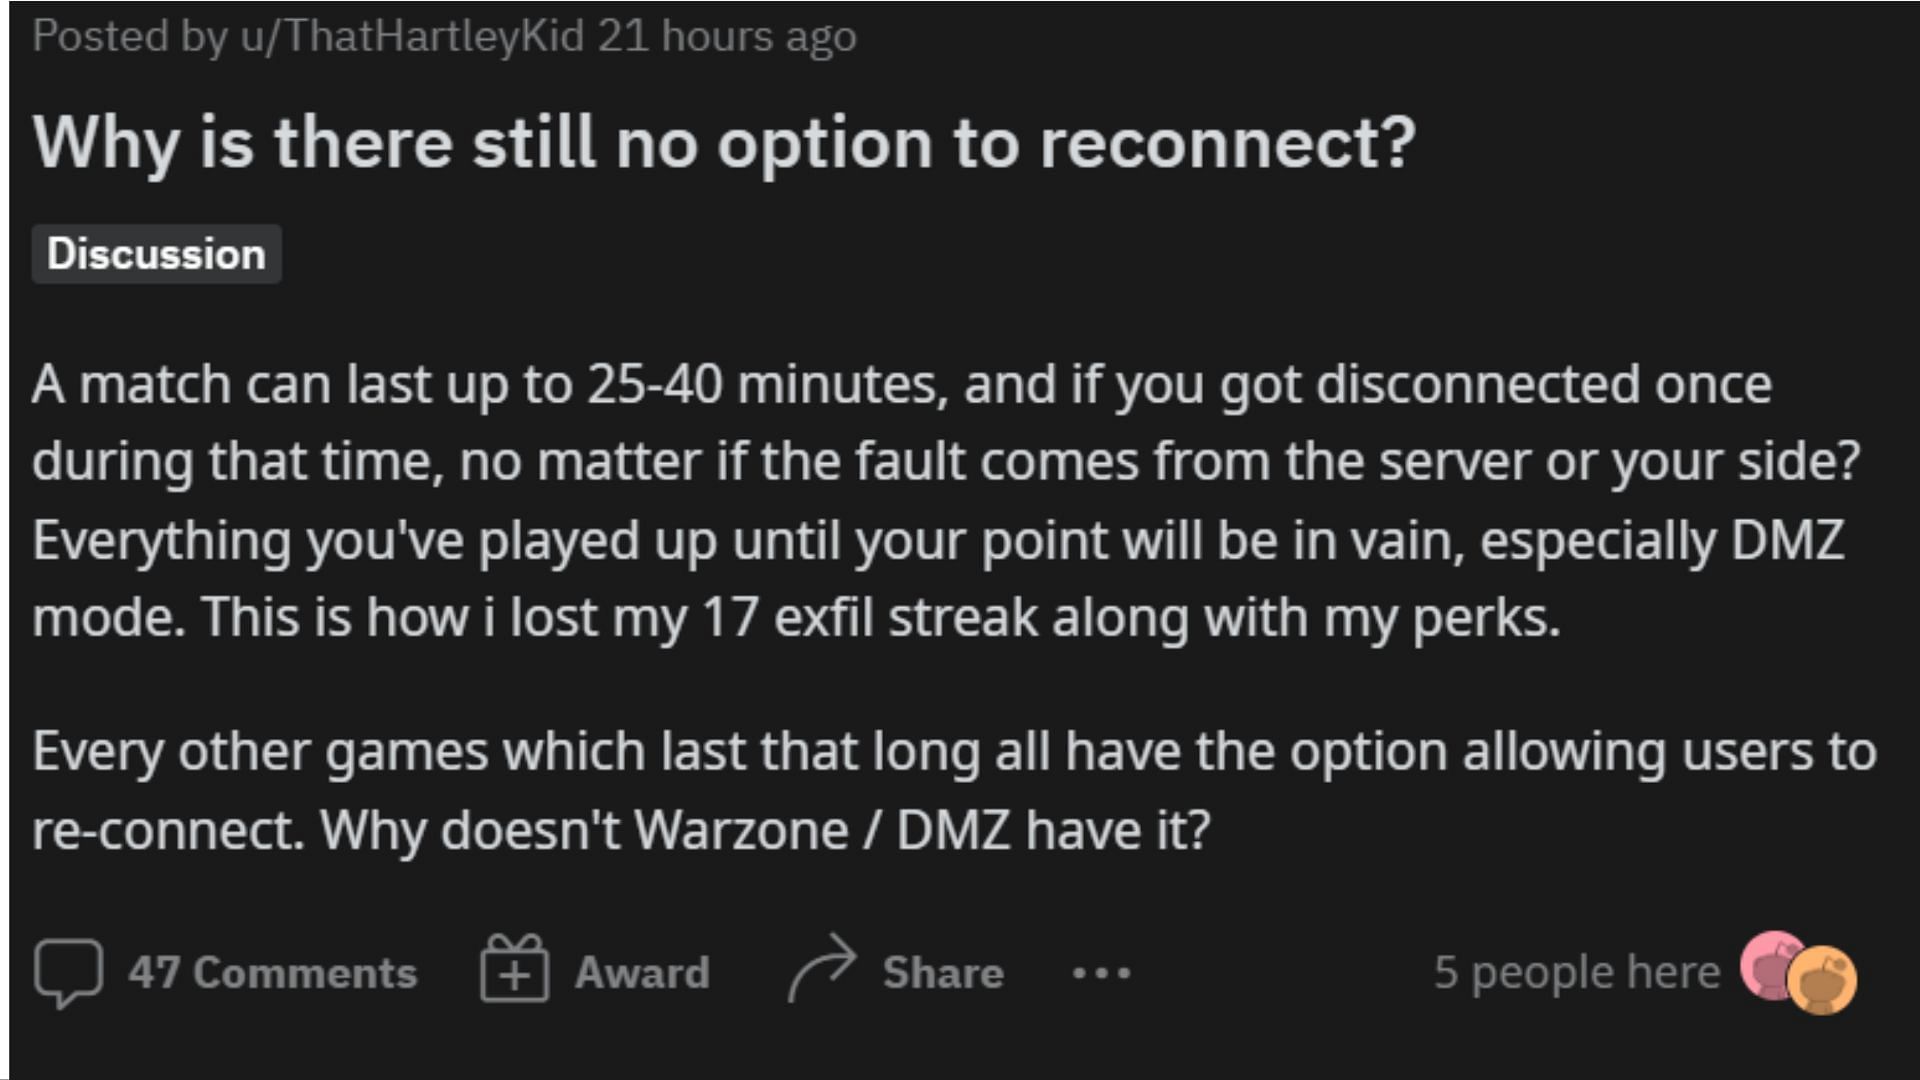 Redditor wants the reconnection option to be there in the game (Image via Reddit)